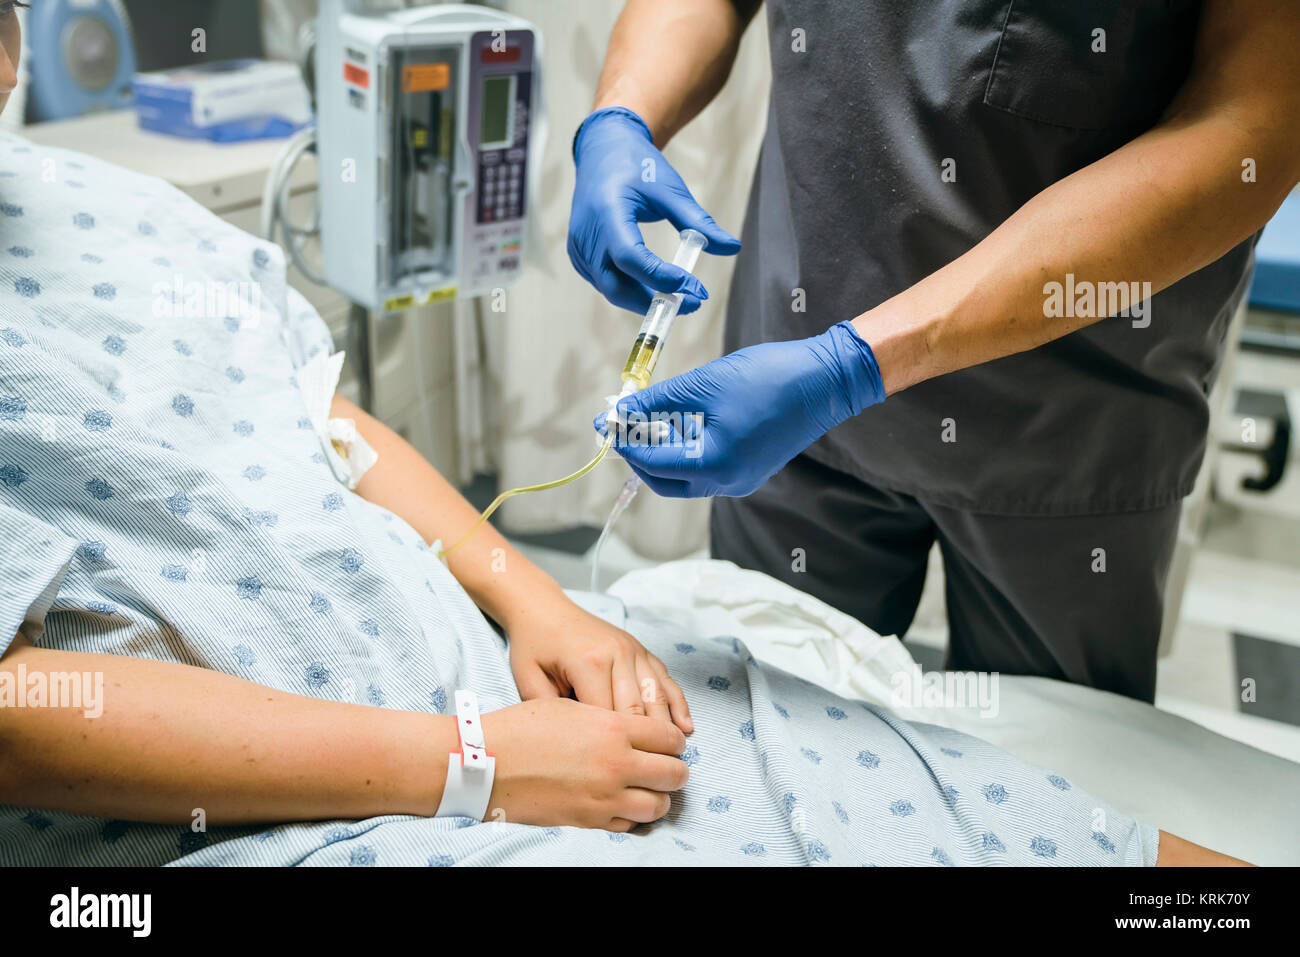 Nurse injecting medicine into tube of patient Stock Photo